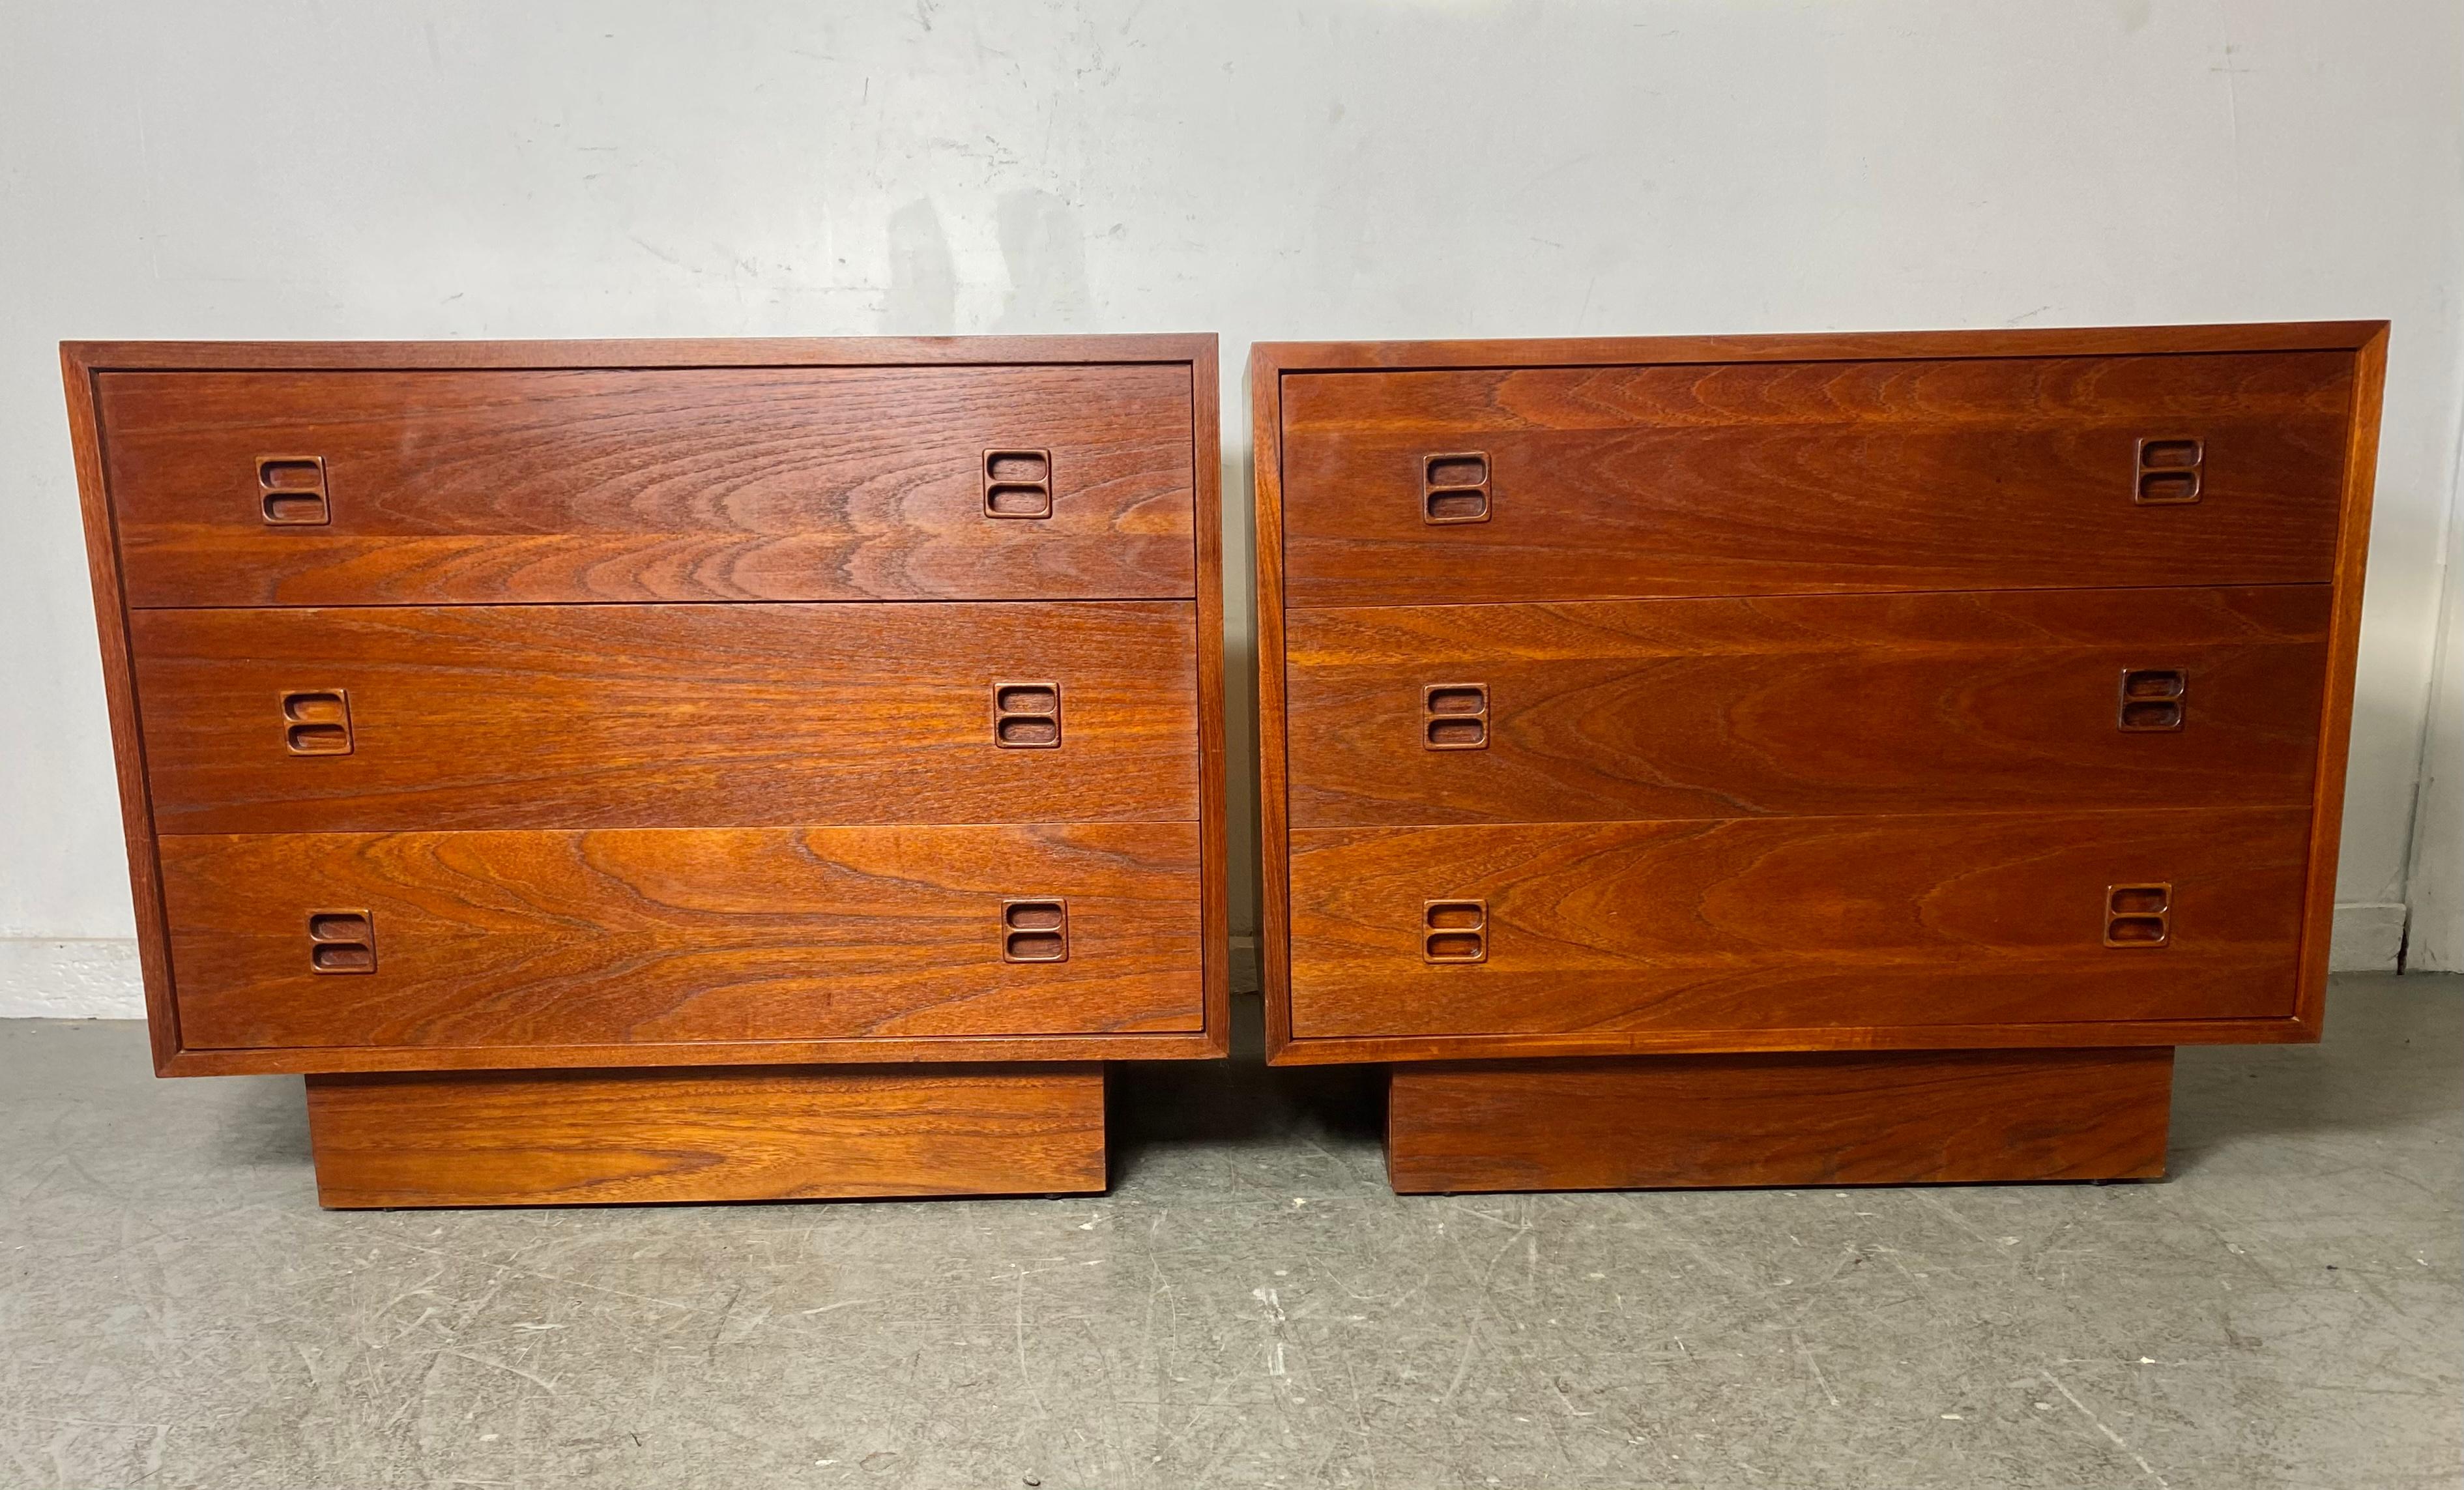 Stunning Matched Pair Danish Modern Teak 3-drawer chests or nite stands..Superior quality and construction,, Dovetail drawers..Richly grained wood.. Beautiful original finish ,,patina..Hand deliveryt avail to nEW yORK cITY OR ANYWHERE EN ROUTE FROM